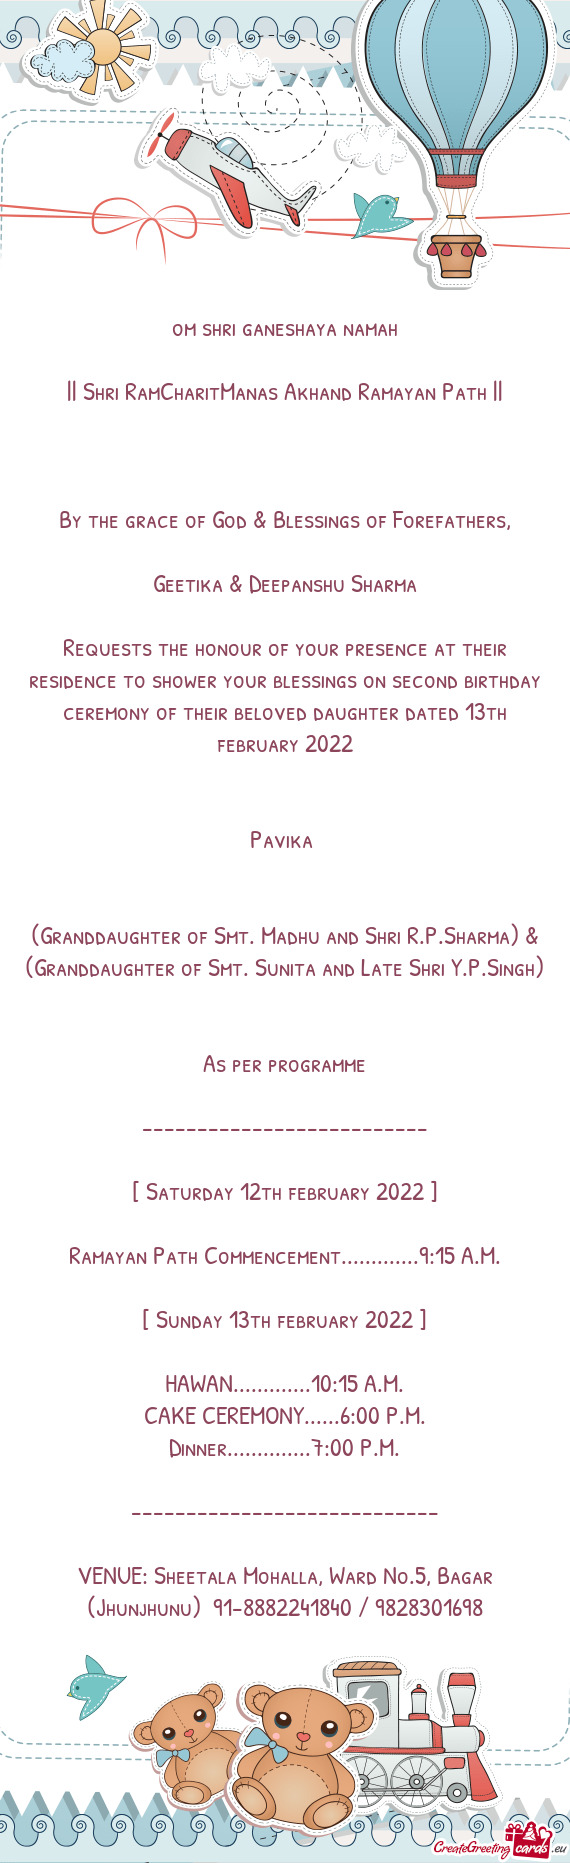 Ceremony of their beloved daughter dated 13th february 2022